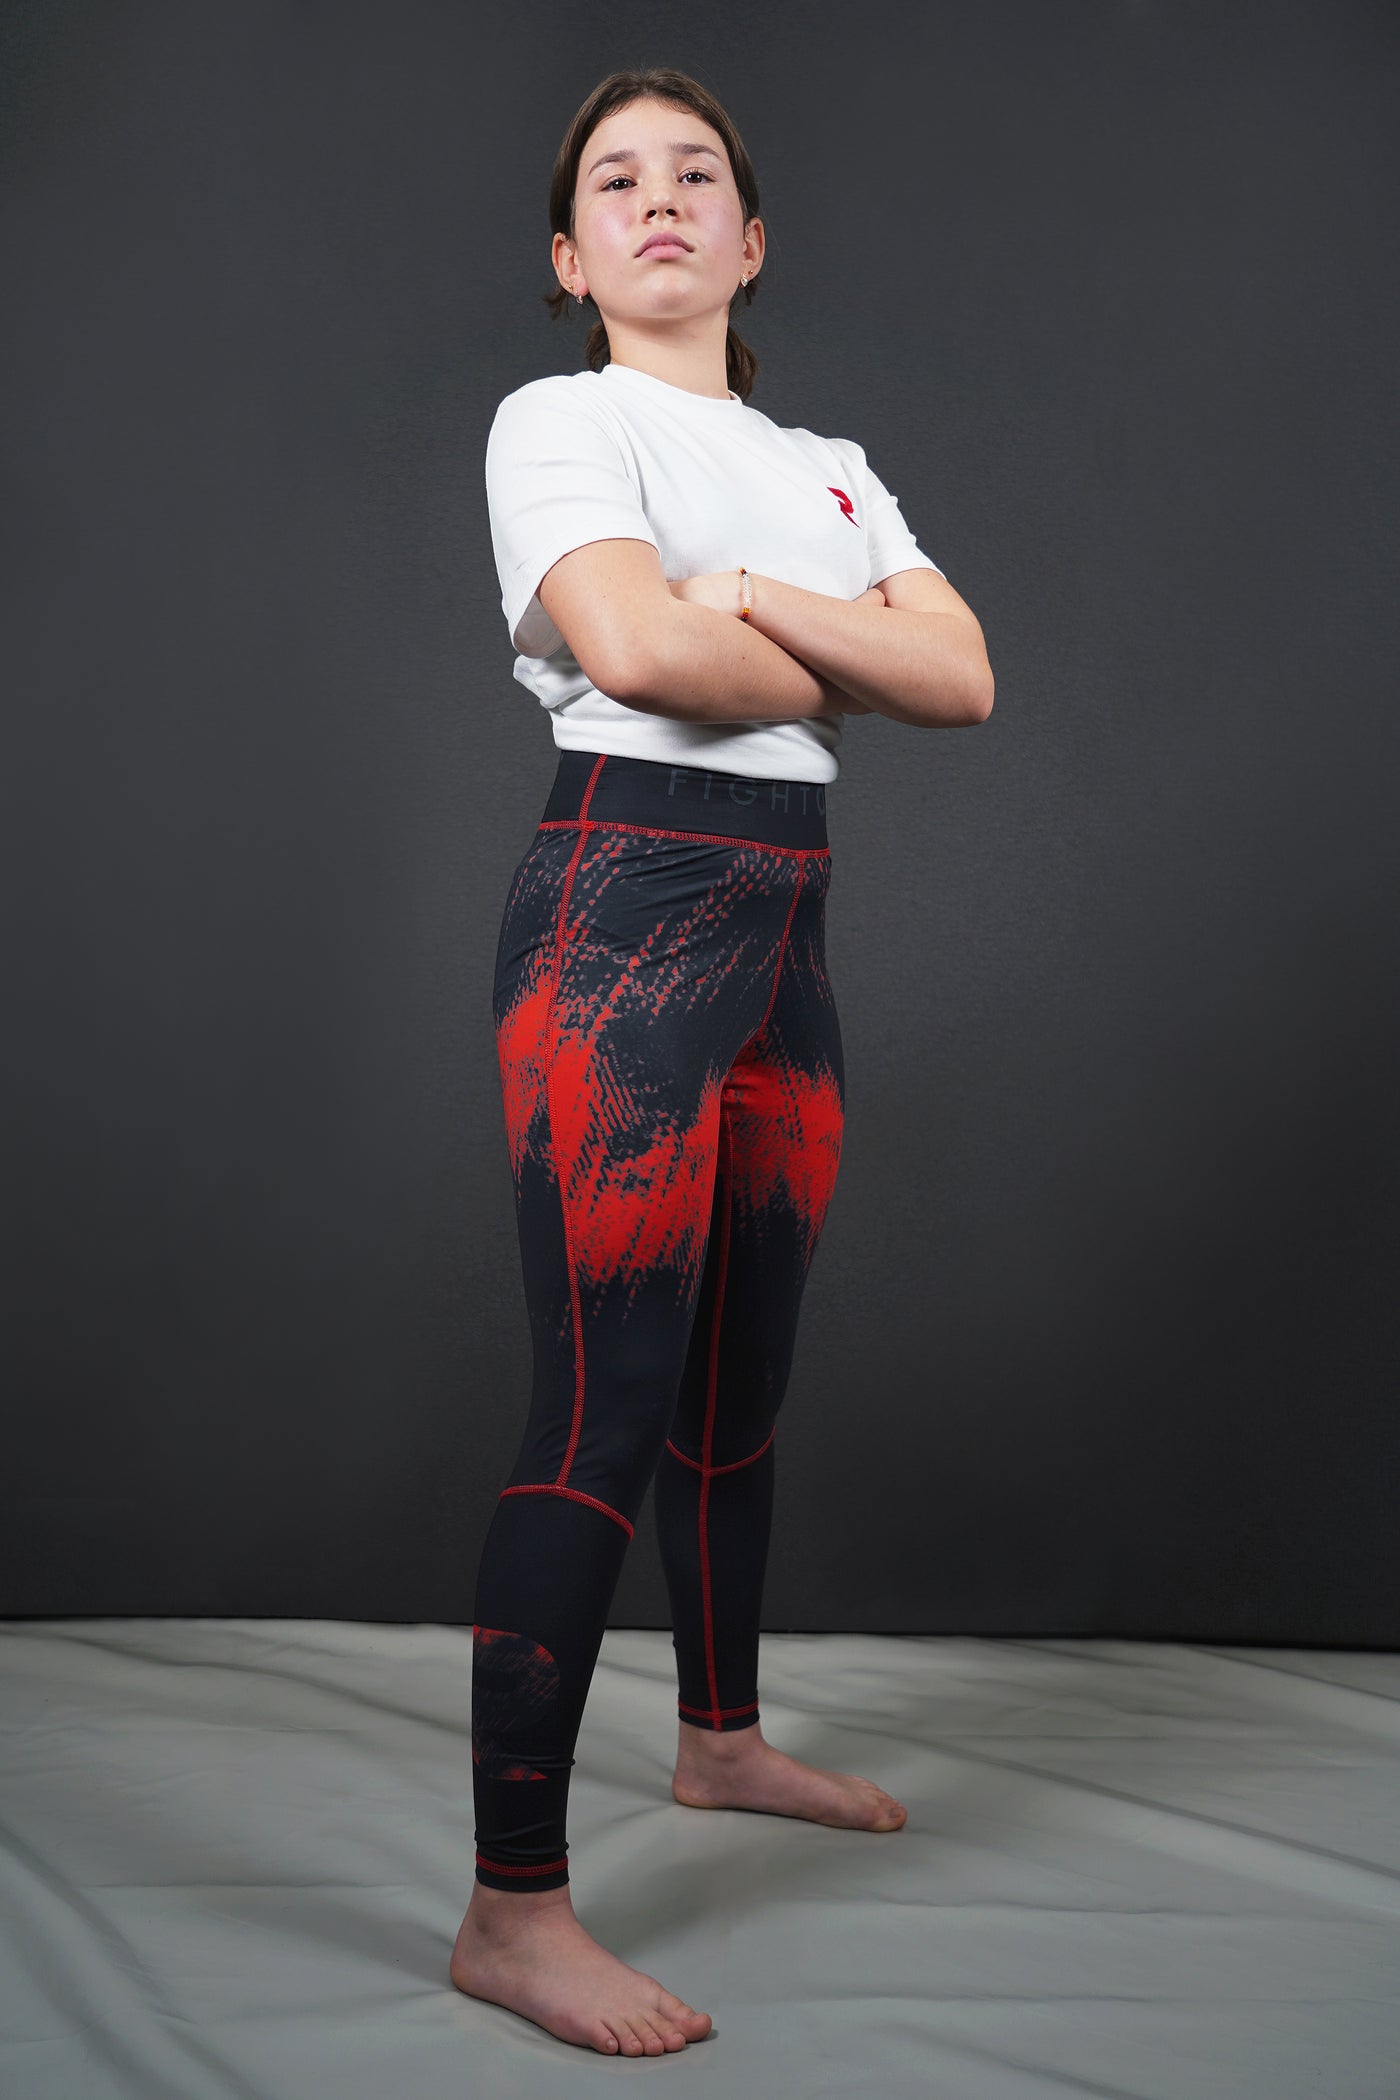 Spats / Leggings - Performance Collection